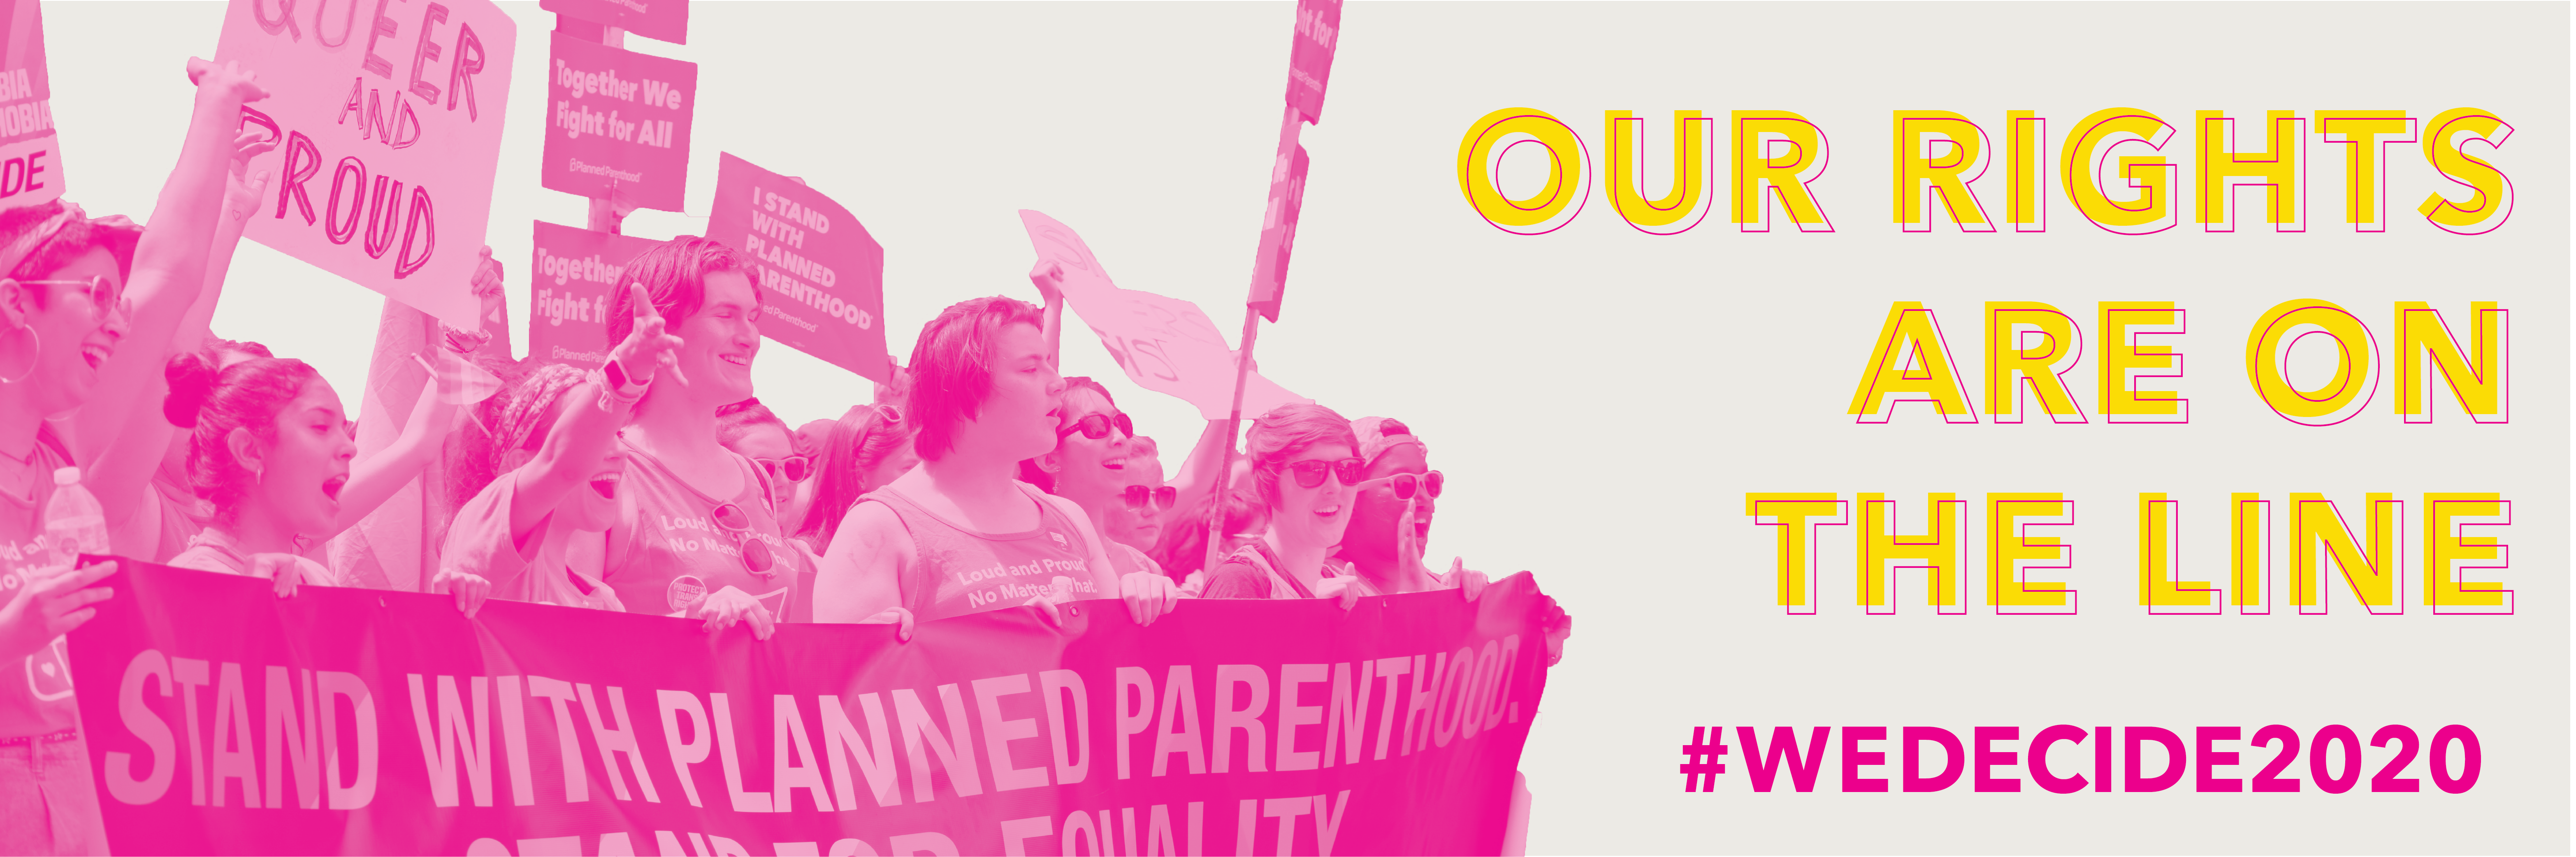 Banner of Planned Parenthood supporters holding signs with the text "OUR RIGHTS ARE ON THE LINE. #WEDECIDE2020"